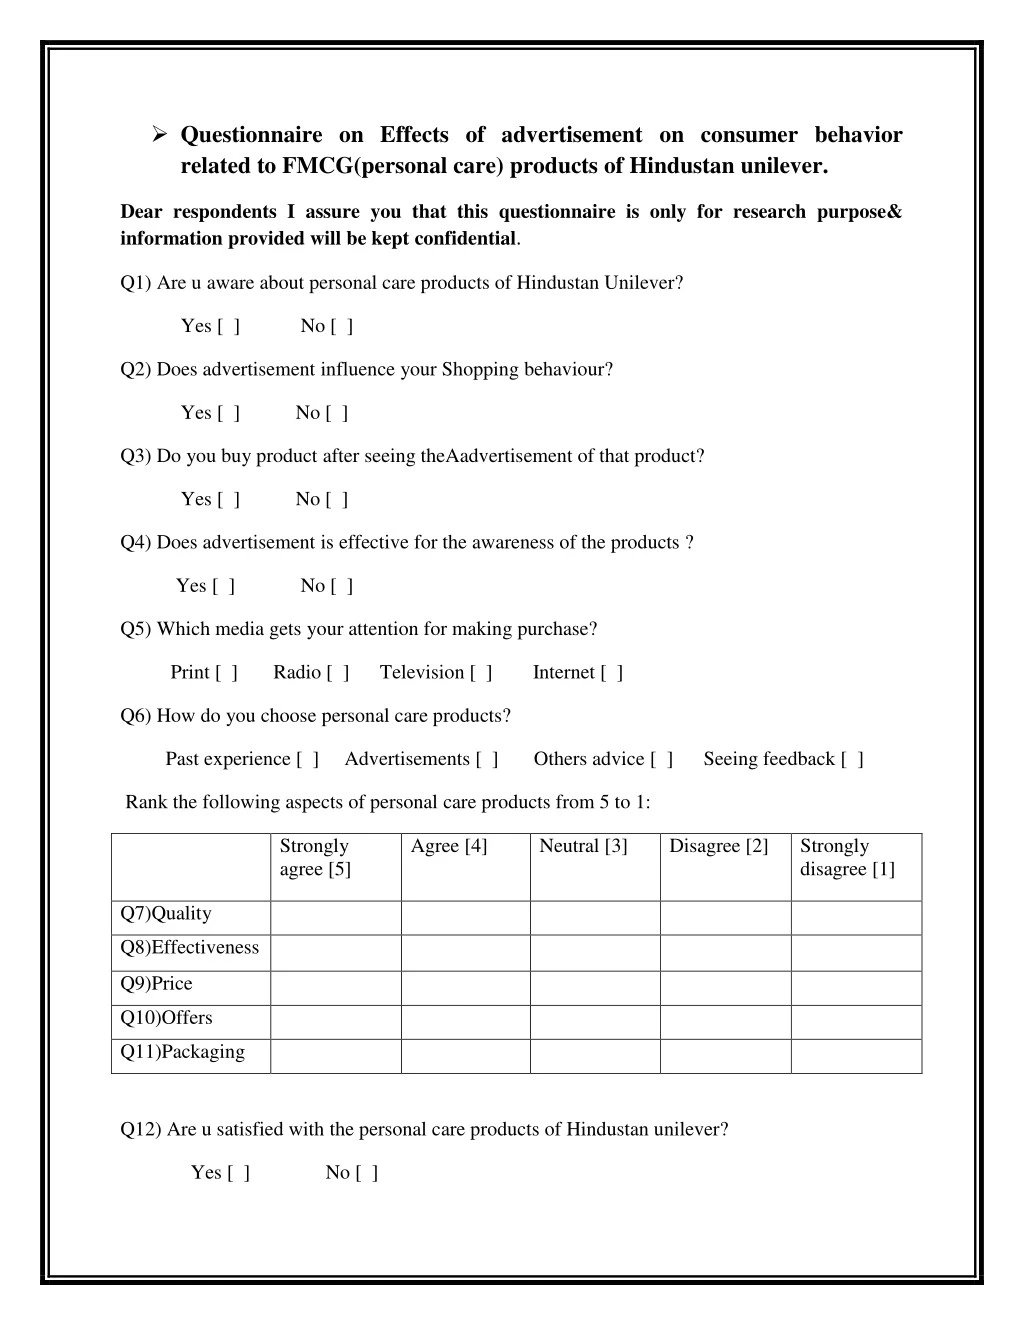 questionnaire on effects of advertisement